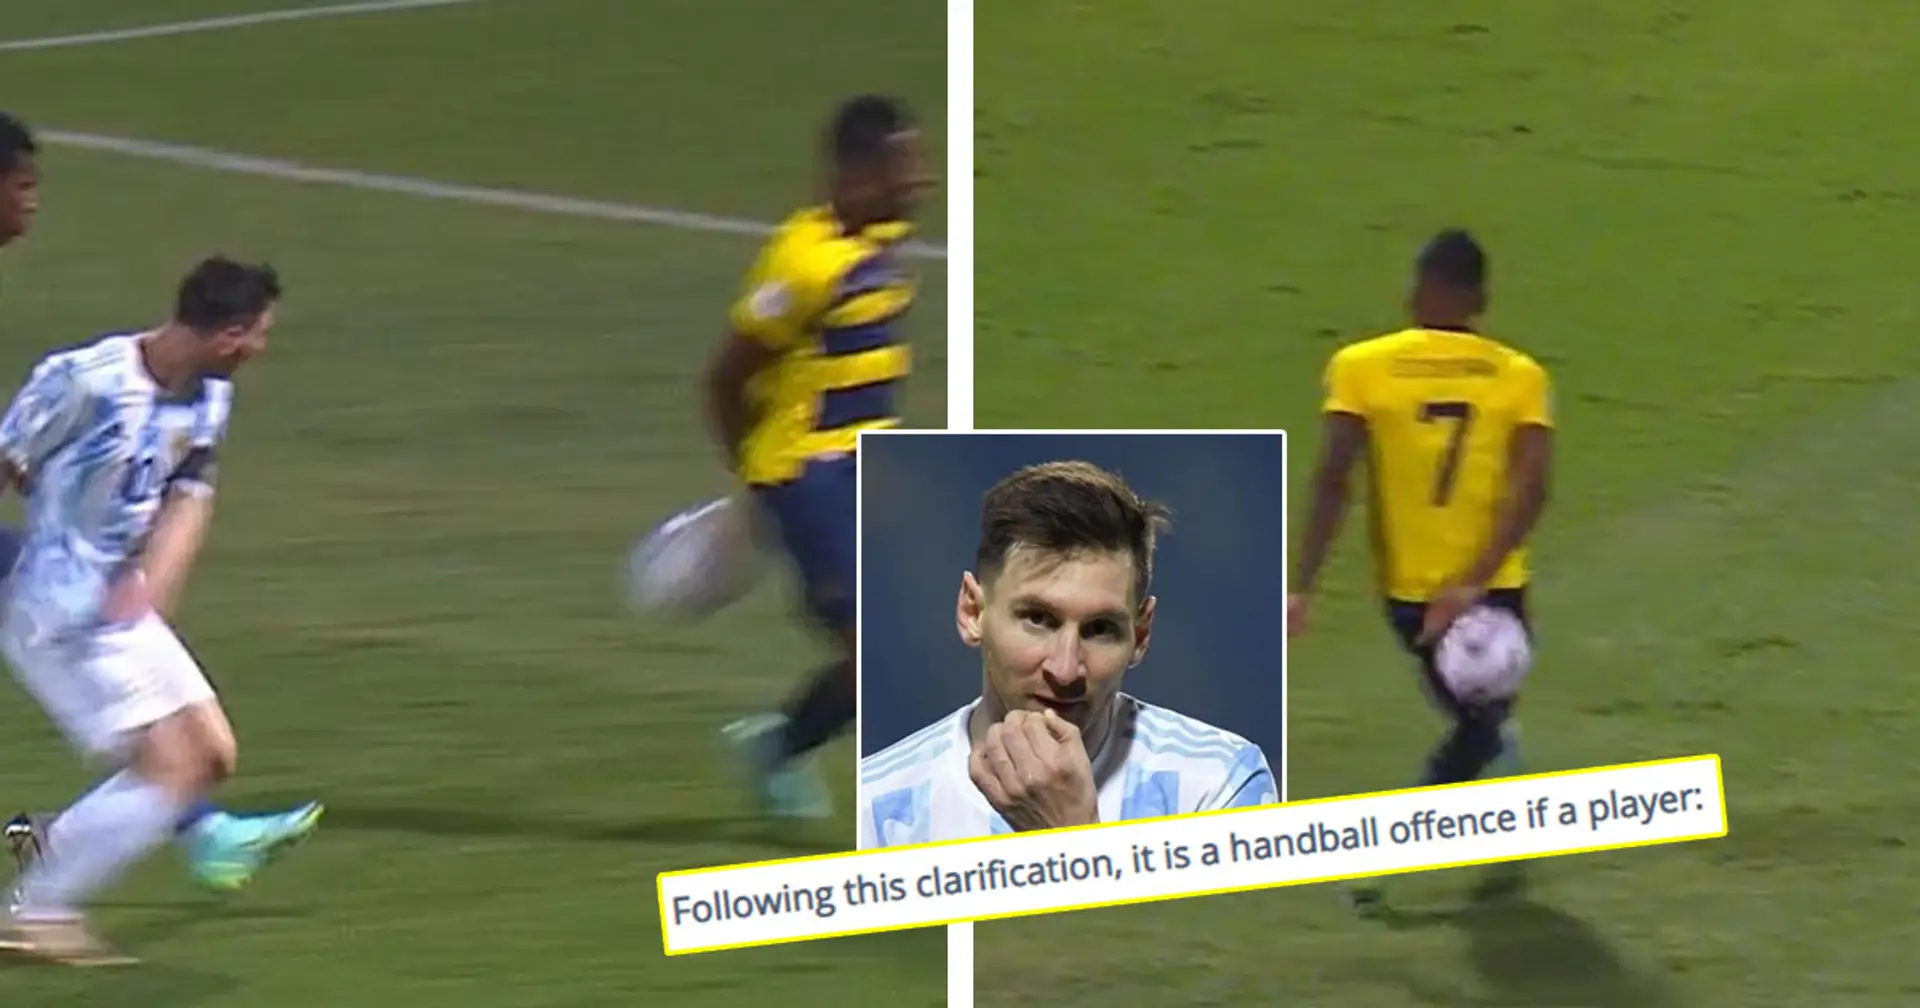 Explained: Why Argentina weren't awarded penalty despite ball clearly hitting Ecuador defender's hand